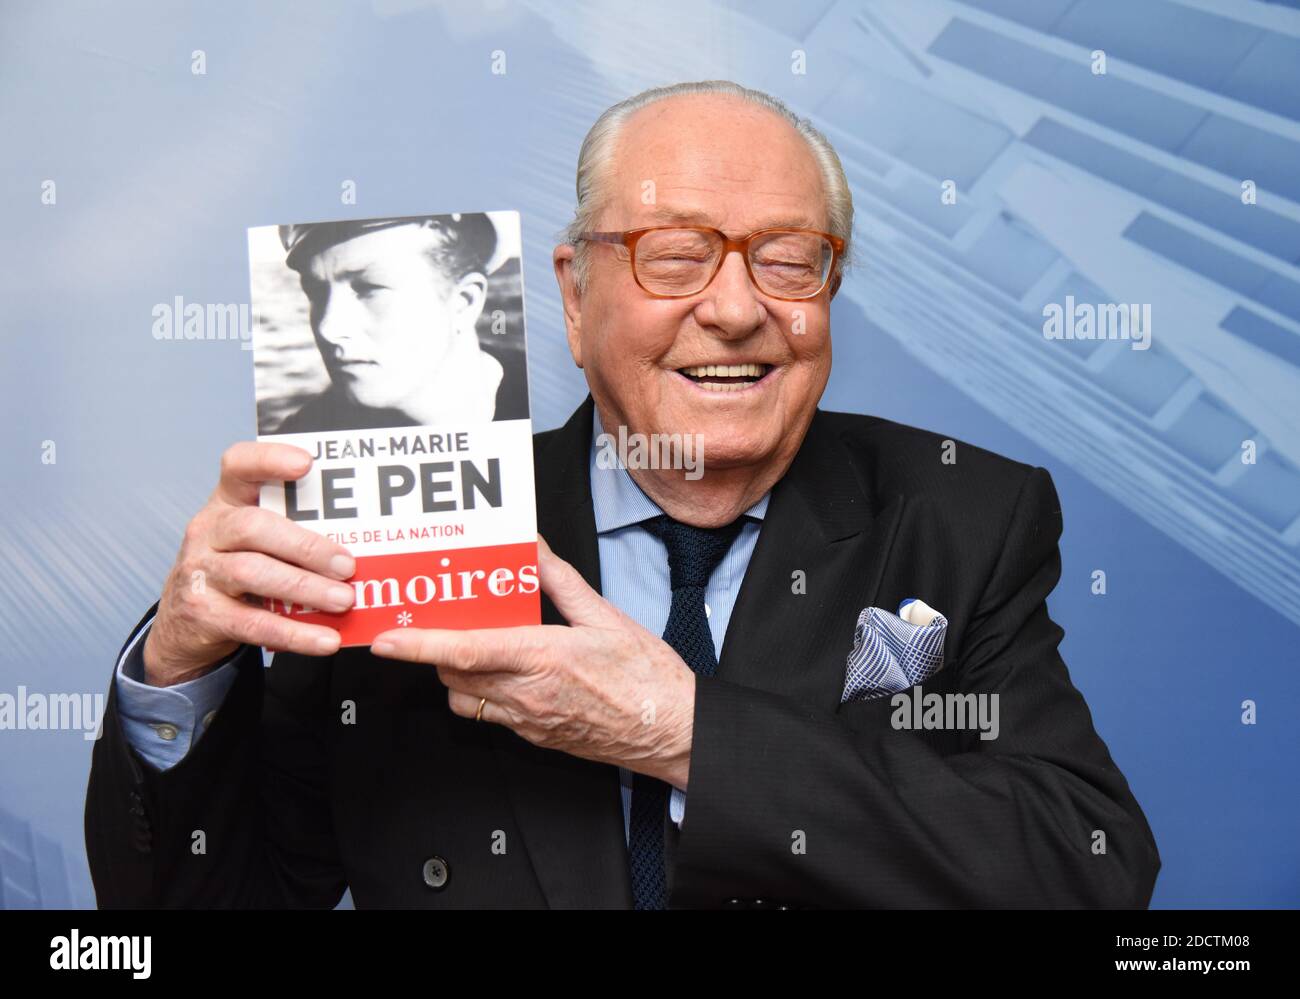 Exclusive - Jean-Marie Le Pen is interviewed by Appolline de Malherbe, (Bourdin  Direct) on RMC/BFM TV in Paris, France on March 2, 2018. Jean-Marie Le Pen  presents the first book about his